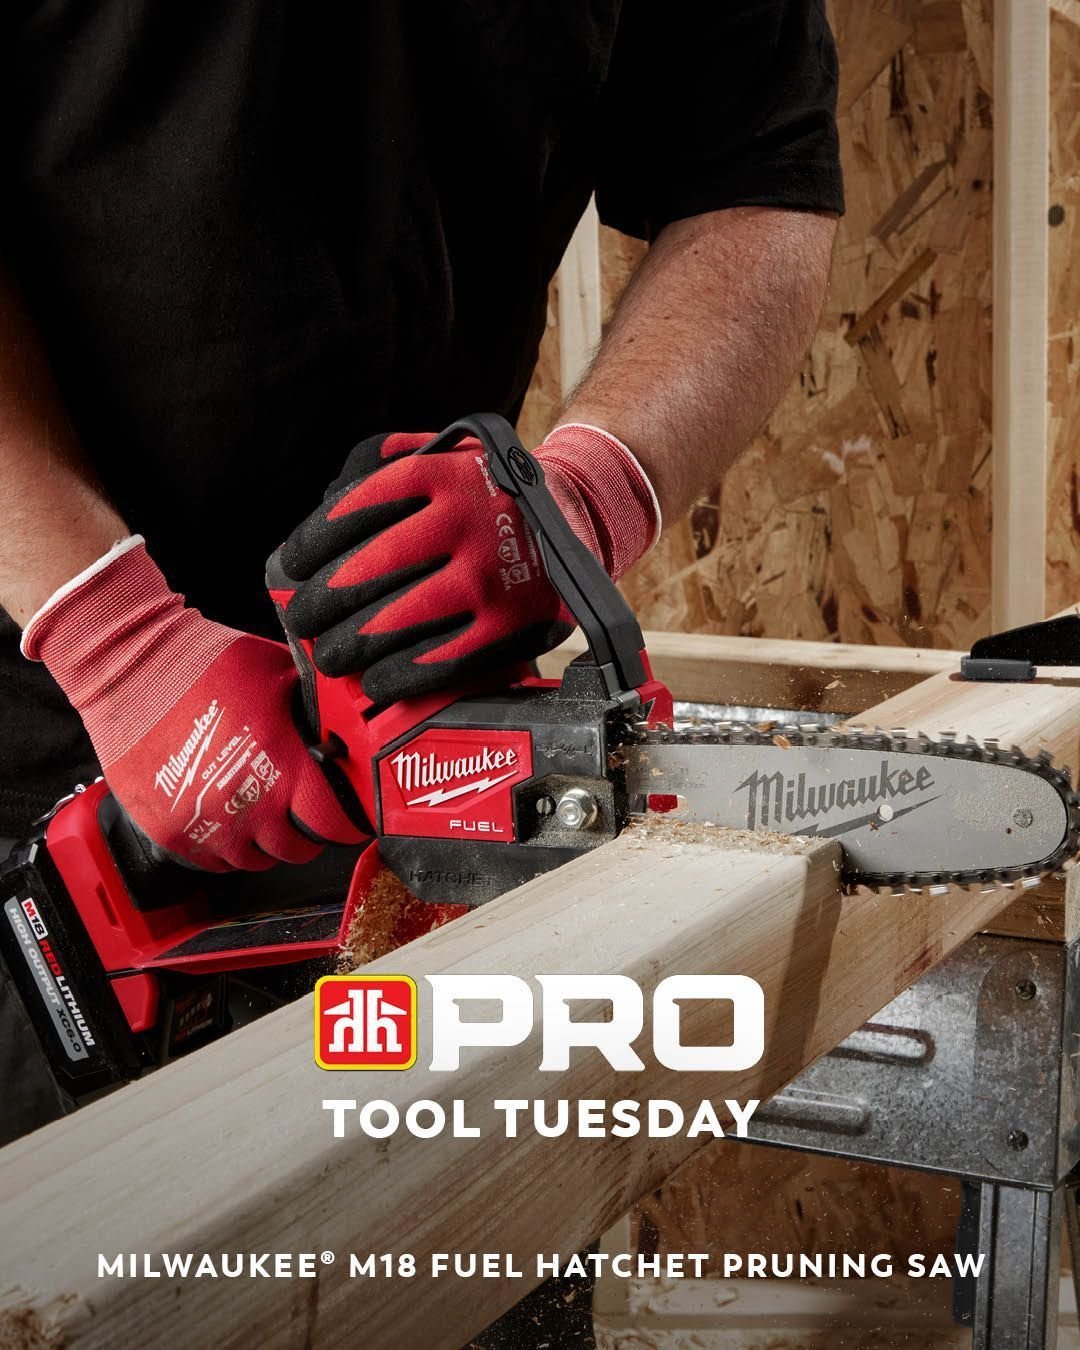 Milwaukee&reg; has done it again! The Milwaukee&reg; M18&trade; FUEL&trade; HATCHET&trade; 8&quot; Pruning Saw is compact and rugged, designed for professional arborists or power utility linemen. 🌲👷

&quot;The saw includes Milwaukee's&reg; POWERSTA